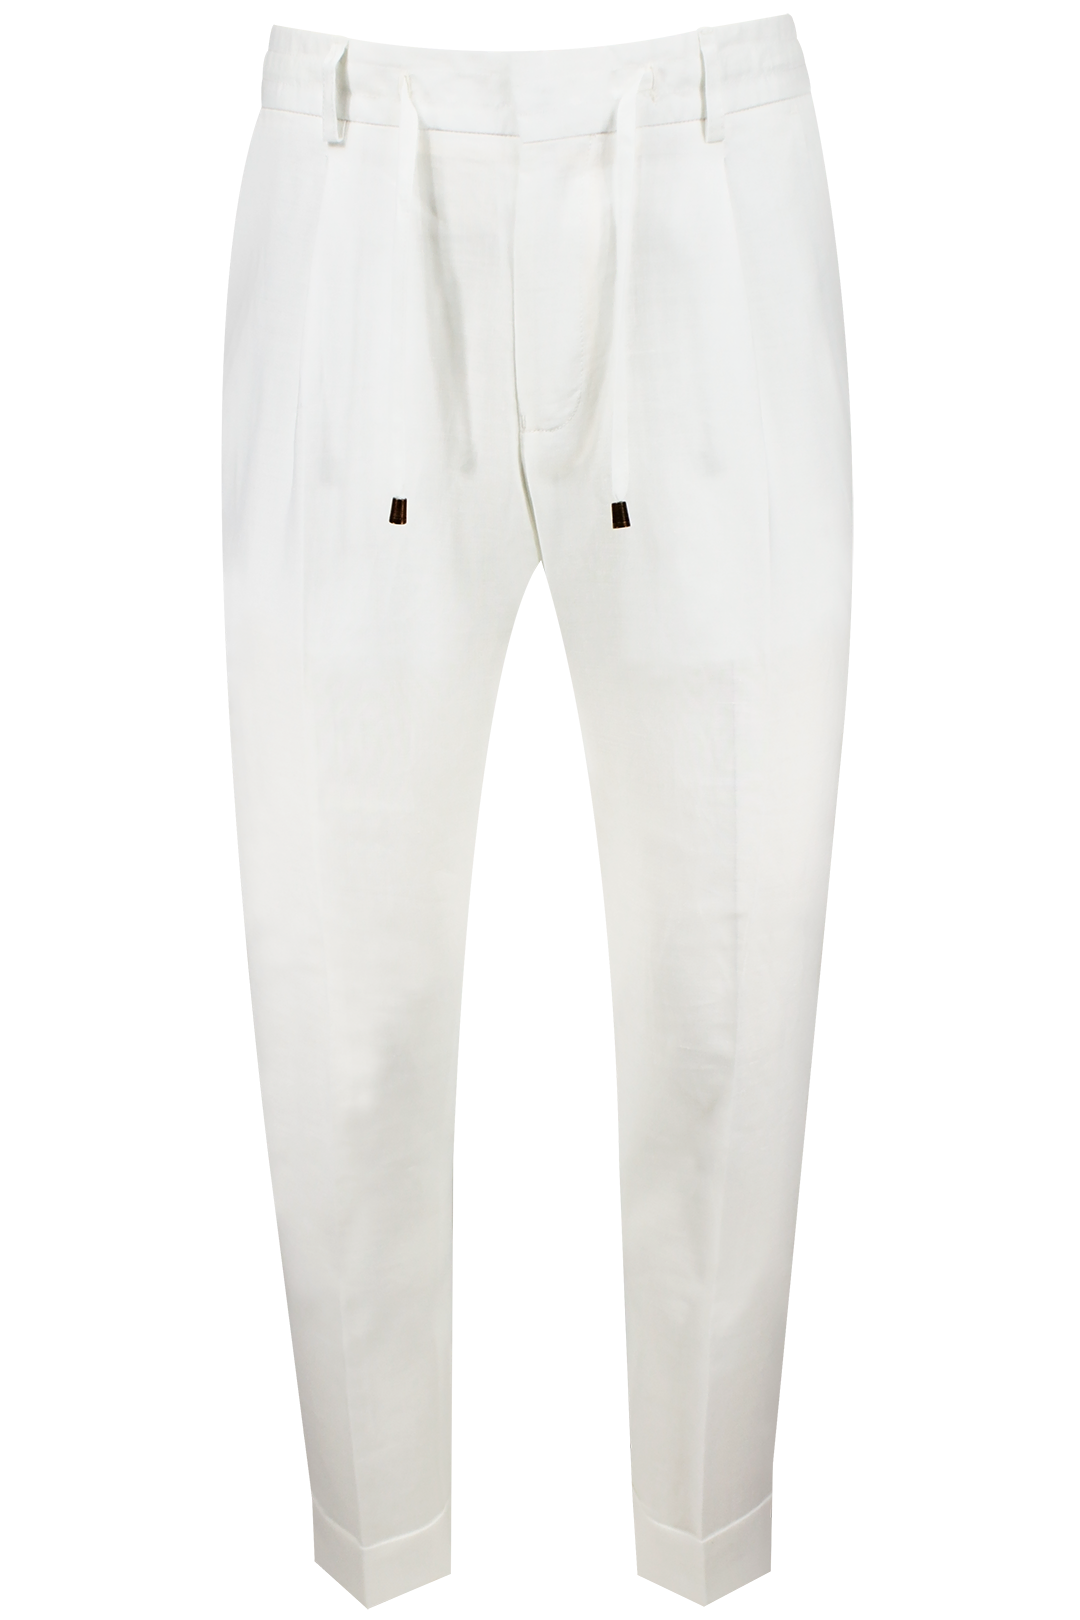 Pantalone con due pince e coulisse in lino bianco